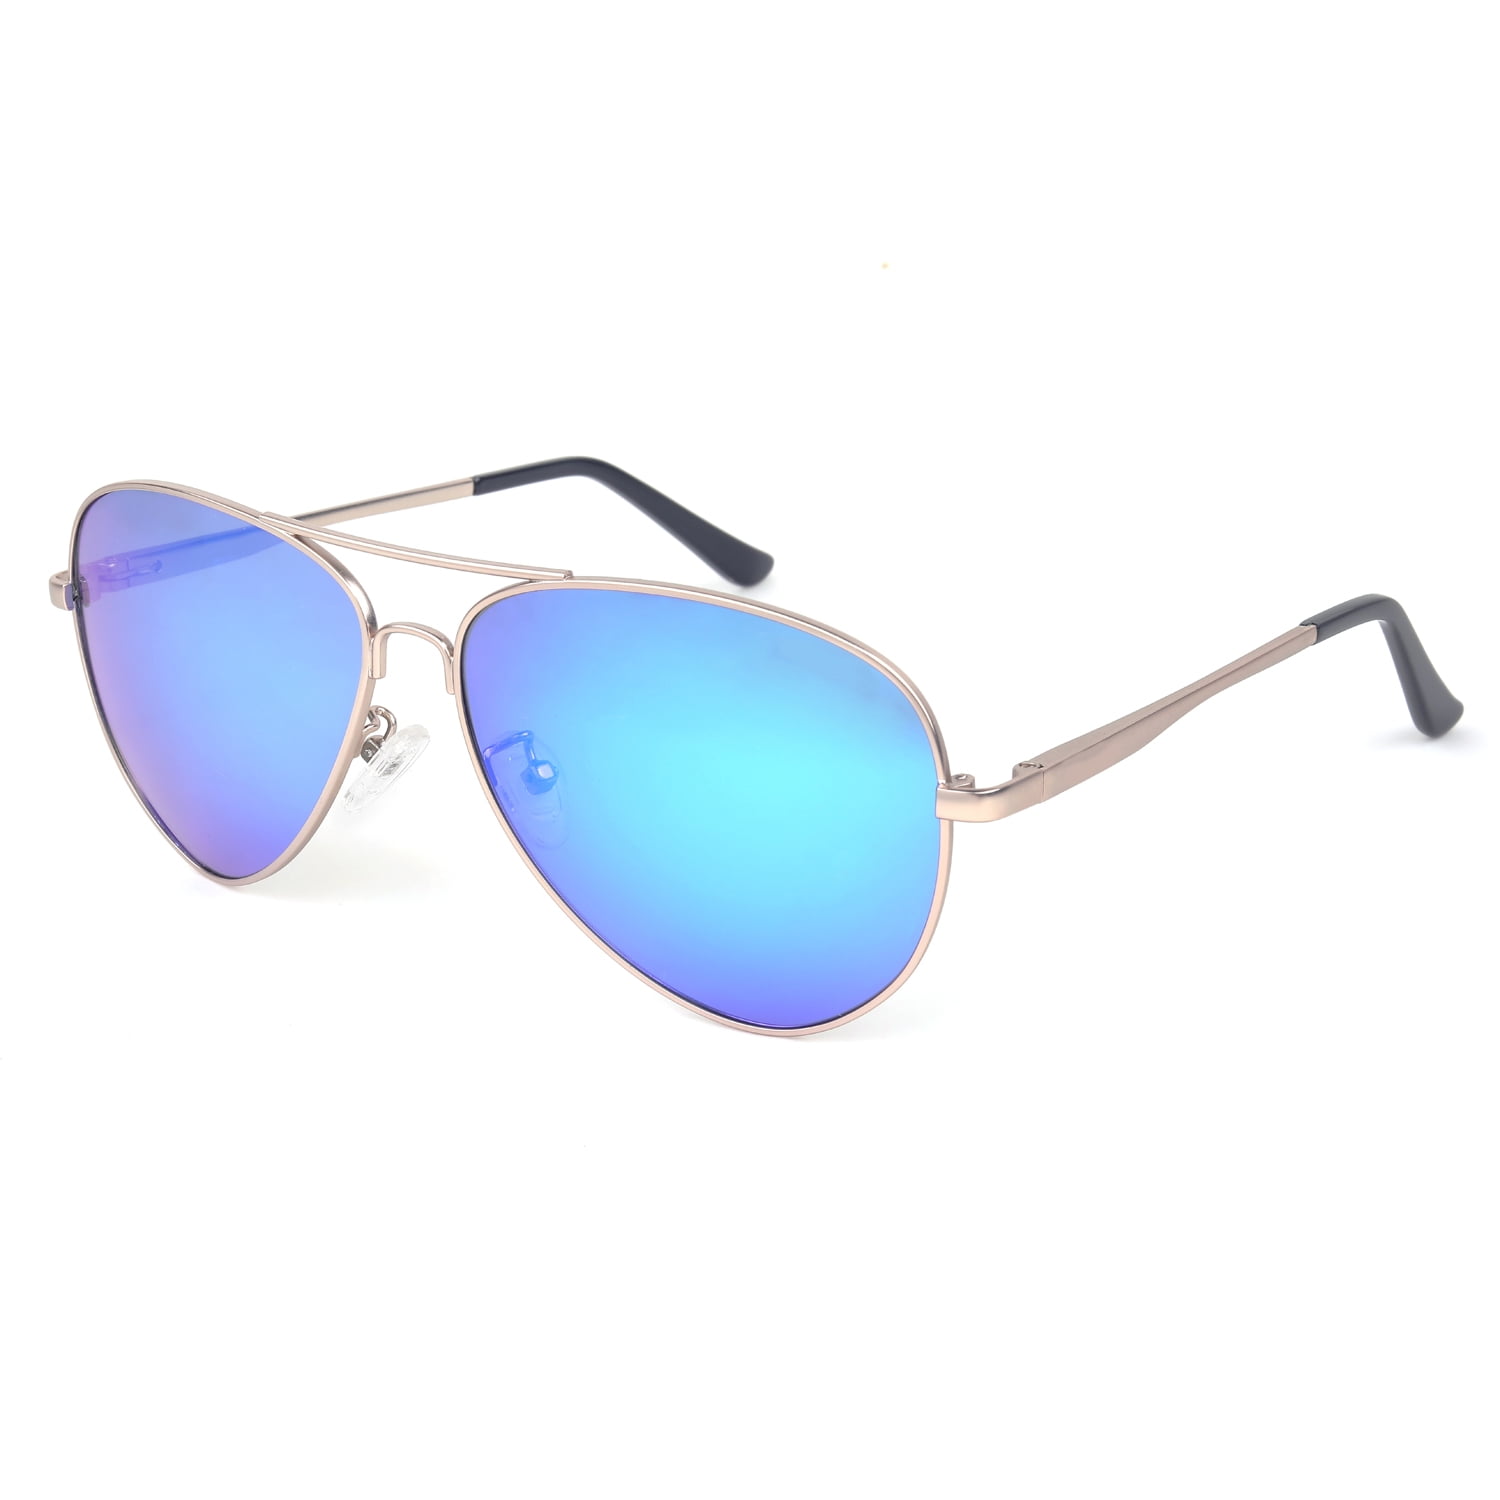 JUST GO Metal Frame Vintage Aviator Style Sunglasses with Case, Polarized  Lenses, 100% UV Protection, Matte Gold, Blue Revo